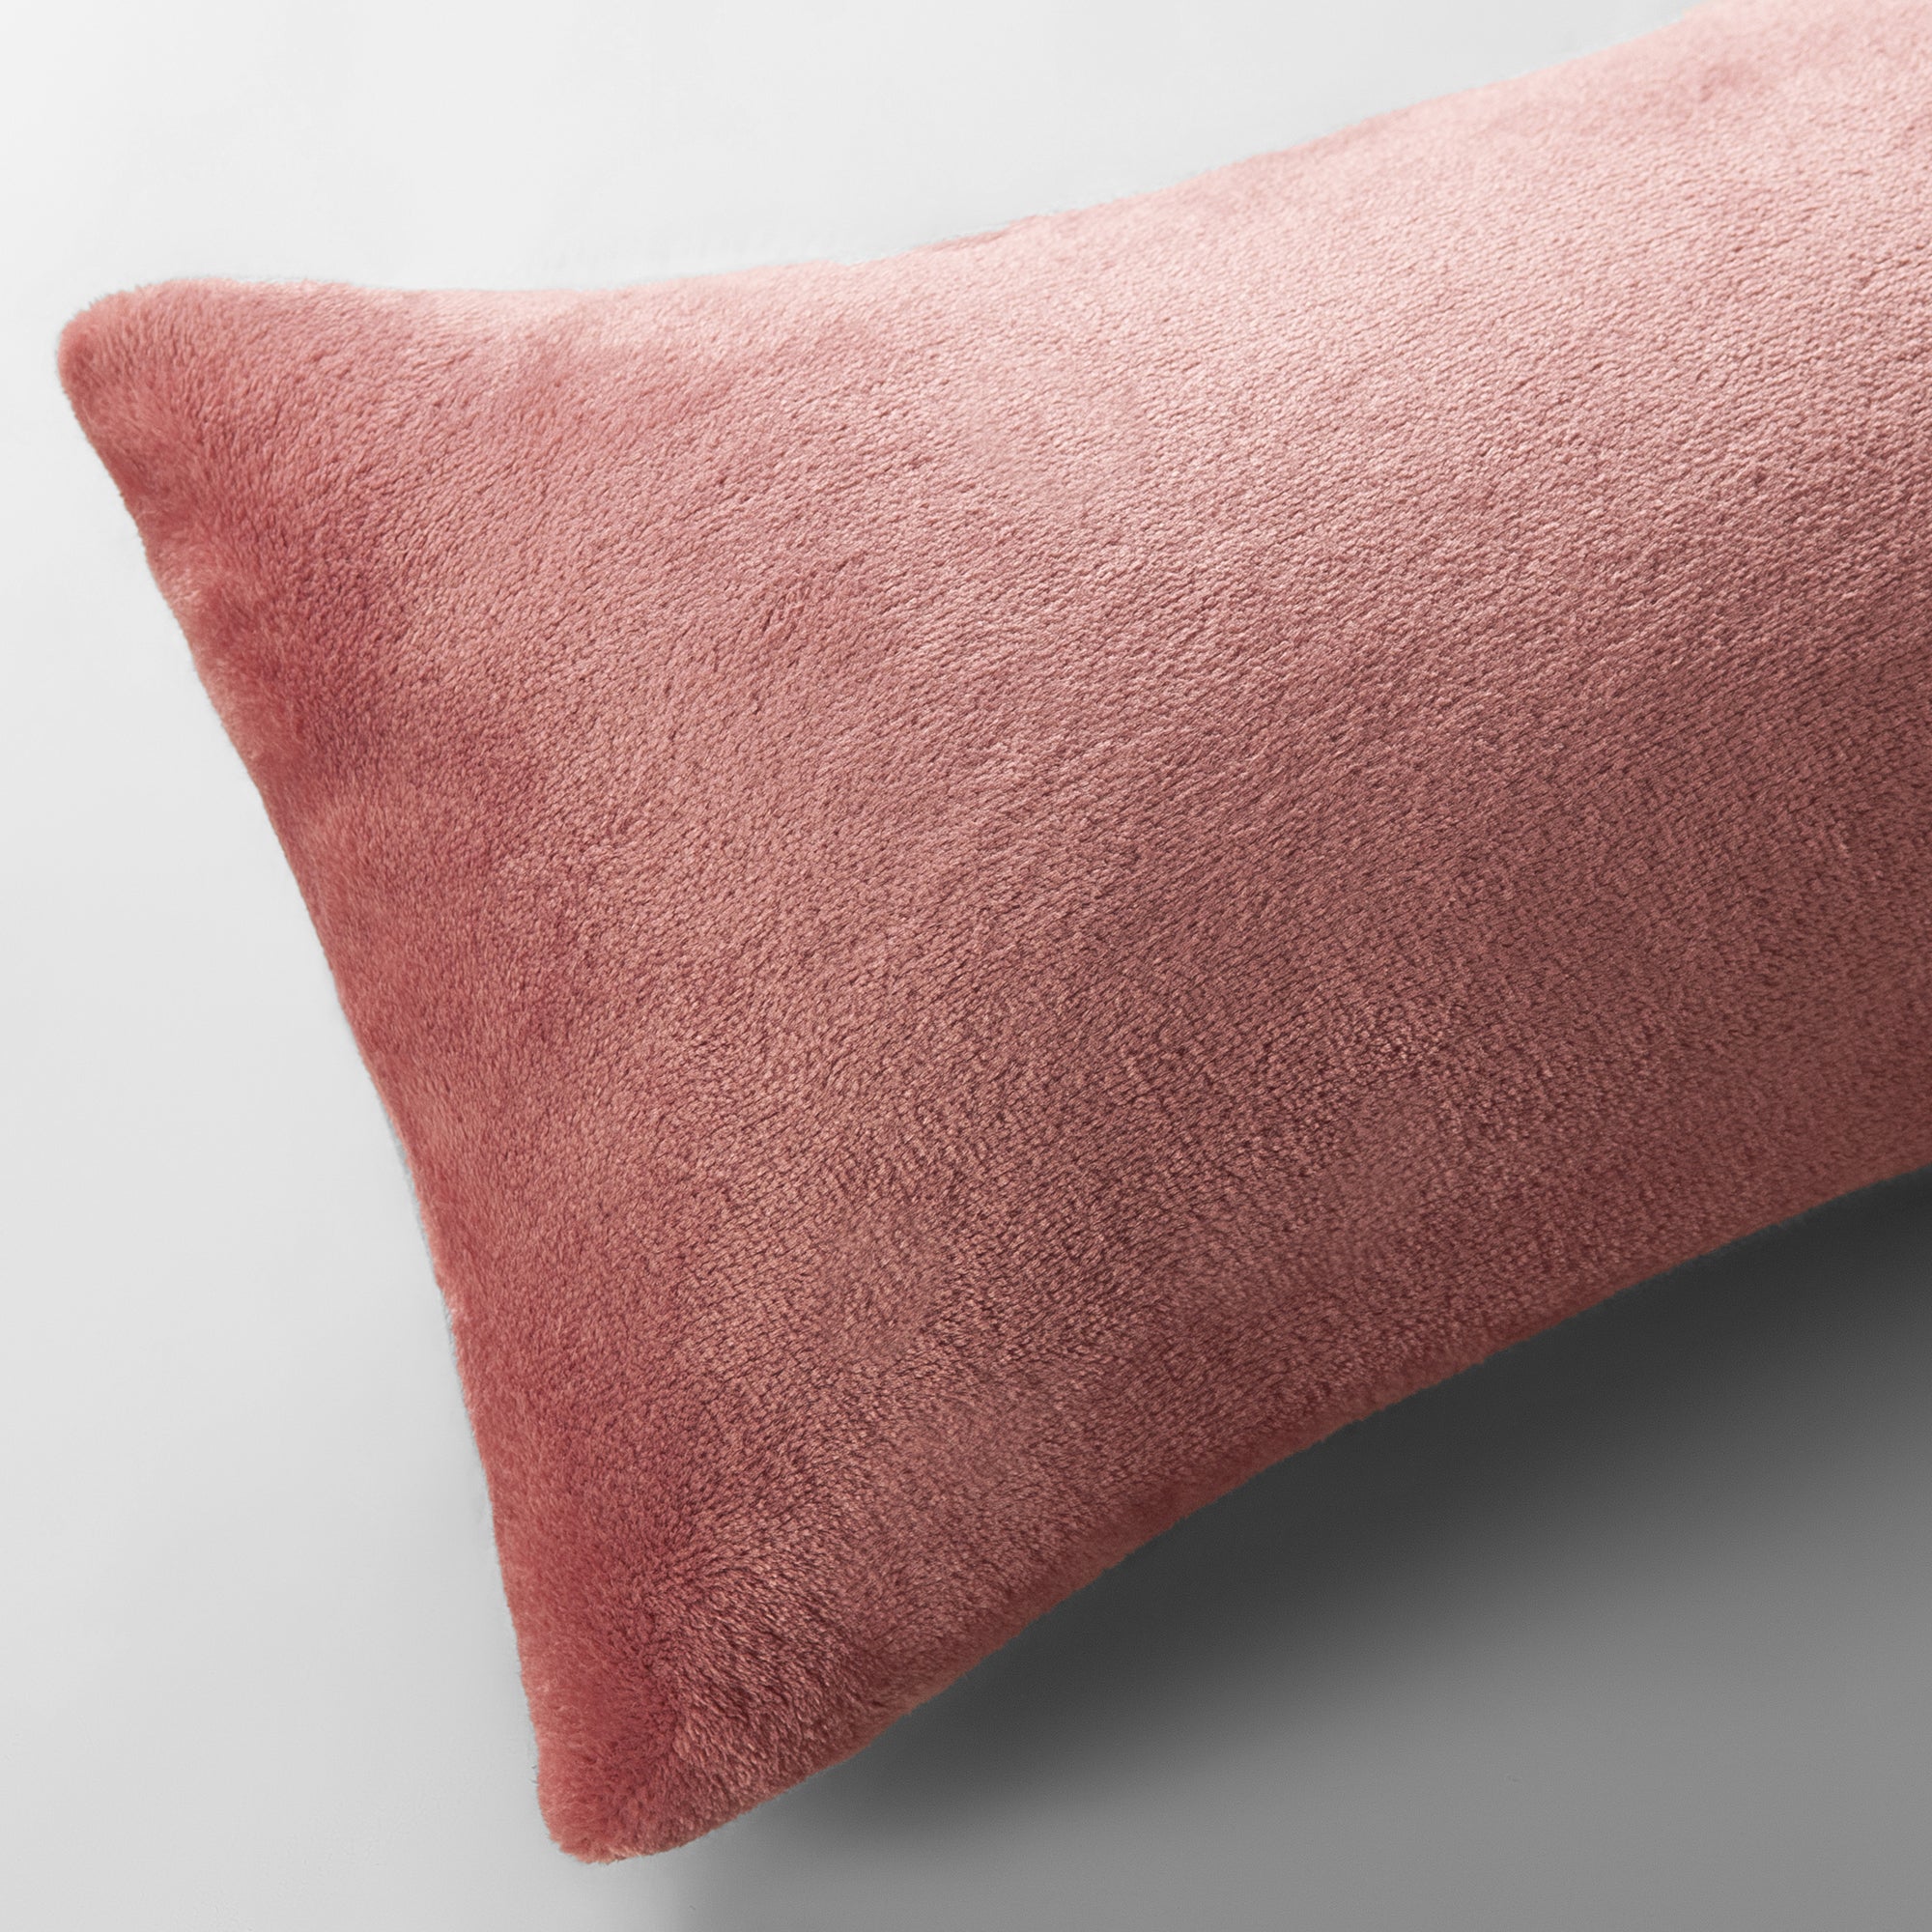 The Linen Company Accessories Dusty Rose Plush Cushion